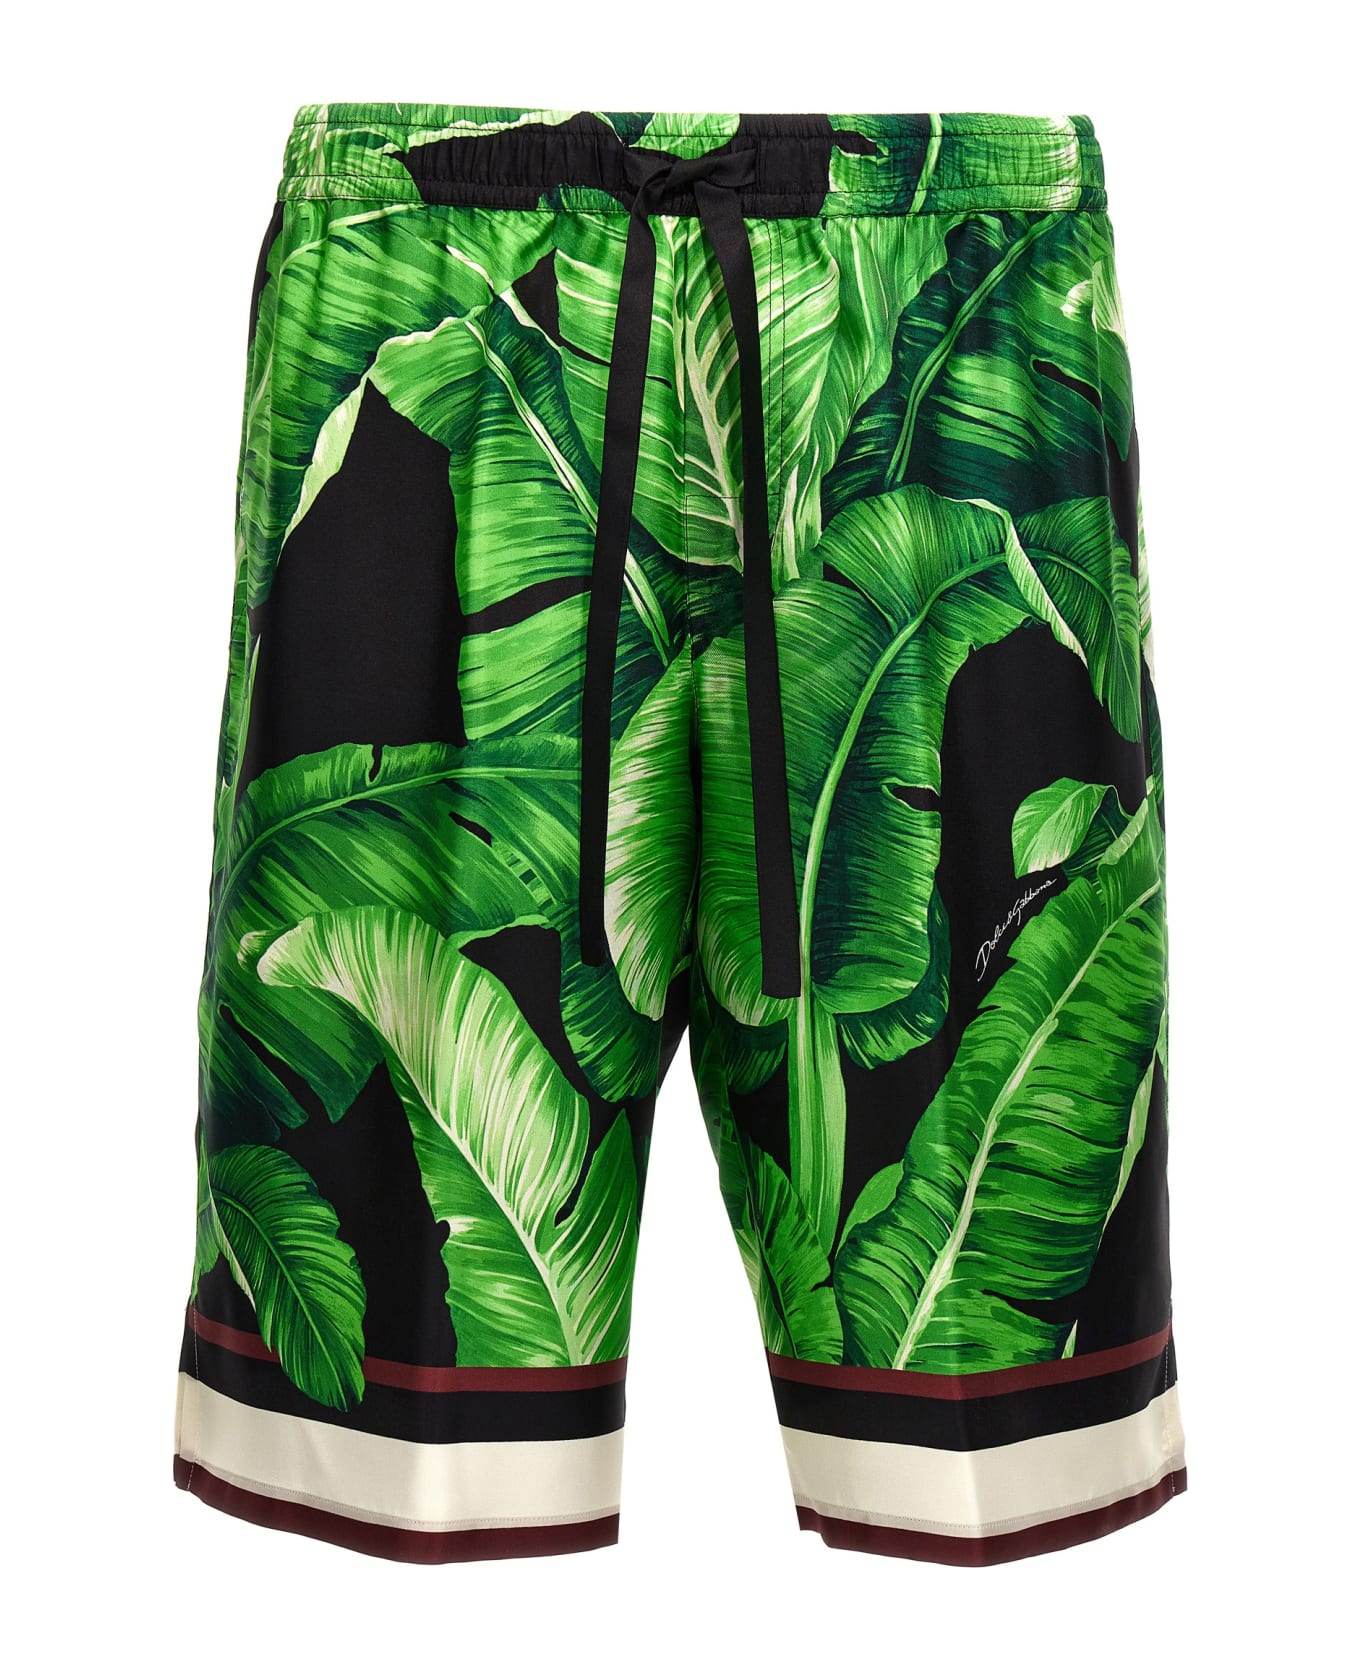 Dolce & Gabbana Bermuda Shorts With All-over Leaf Print - Green ショートパンツ